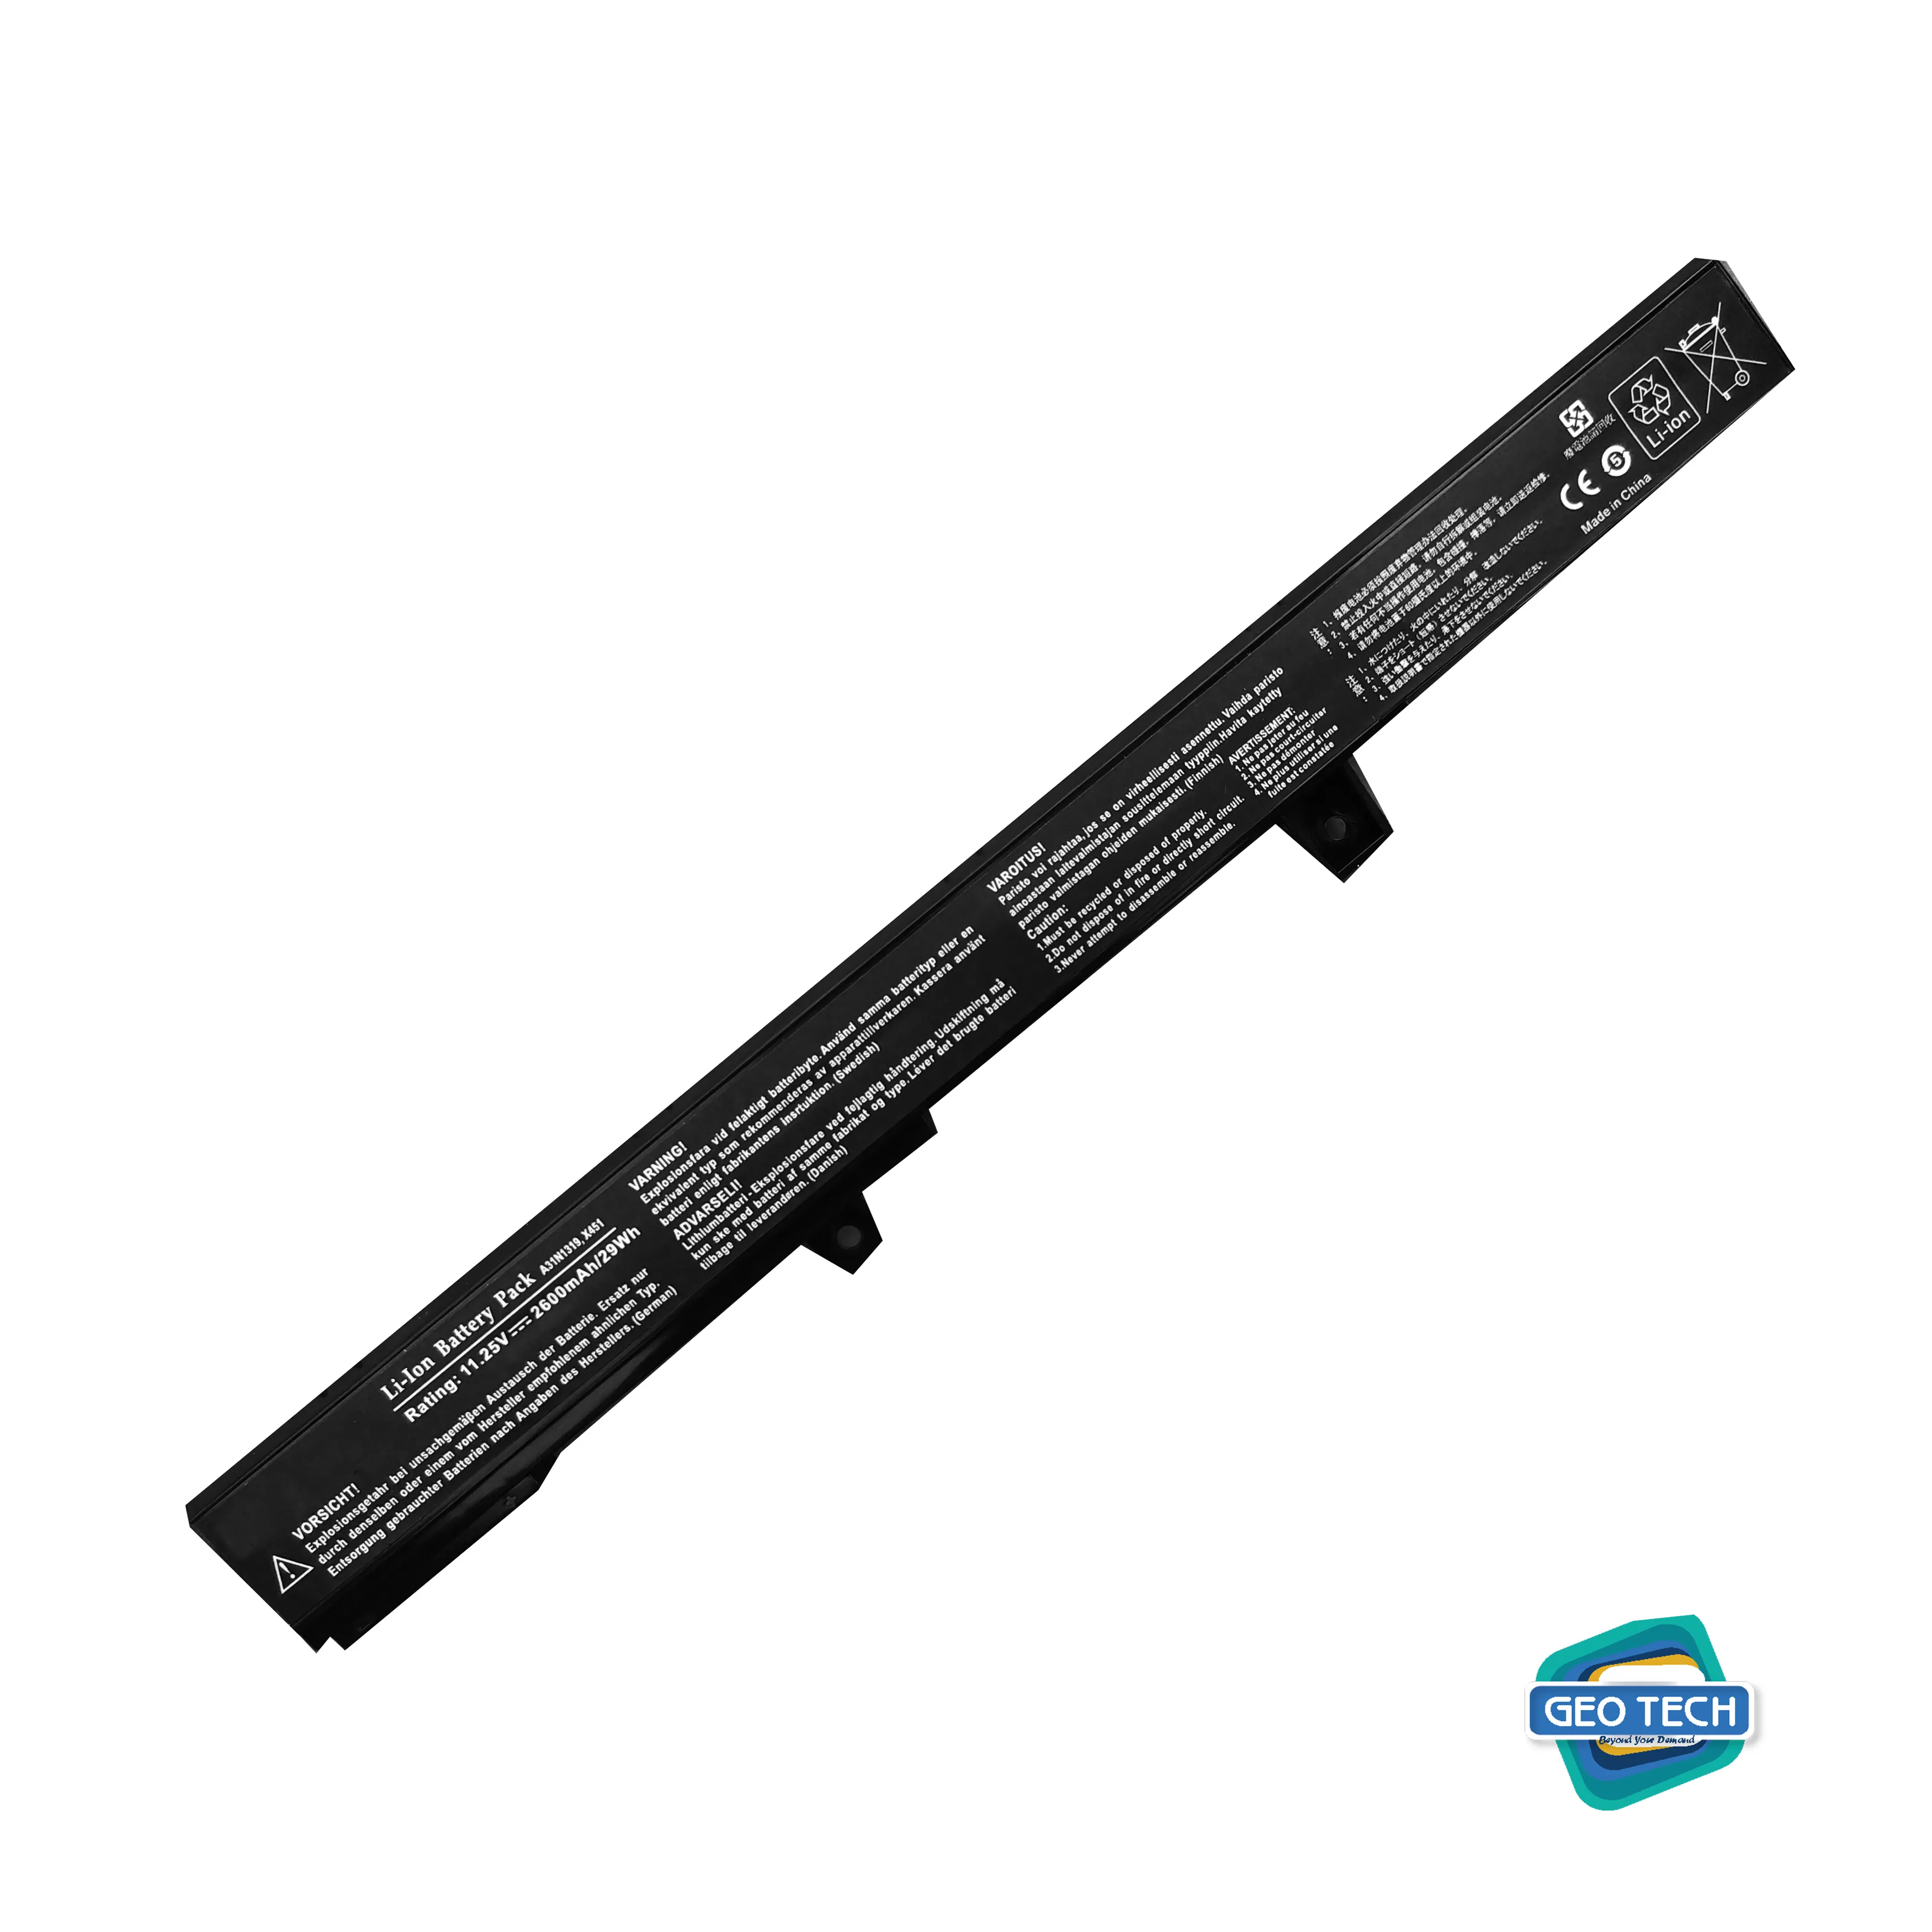 Replacement Battery for Models: Asus X451 X451C X451CA Series Asus X551 X551C X551CA Series Laptop.